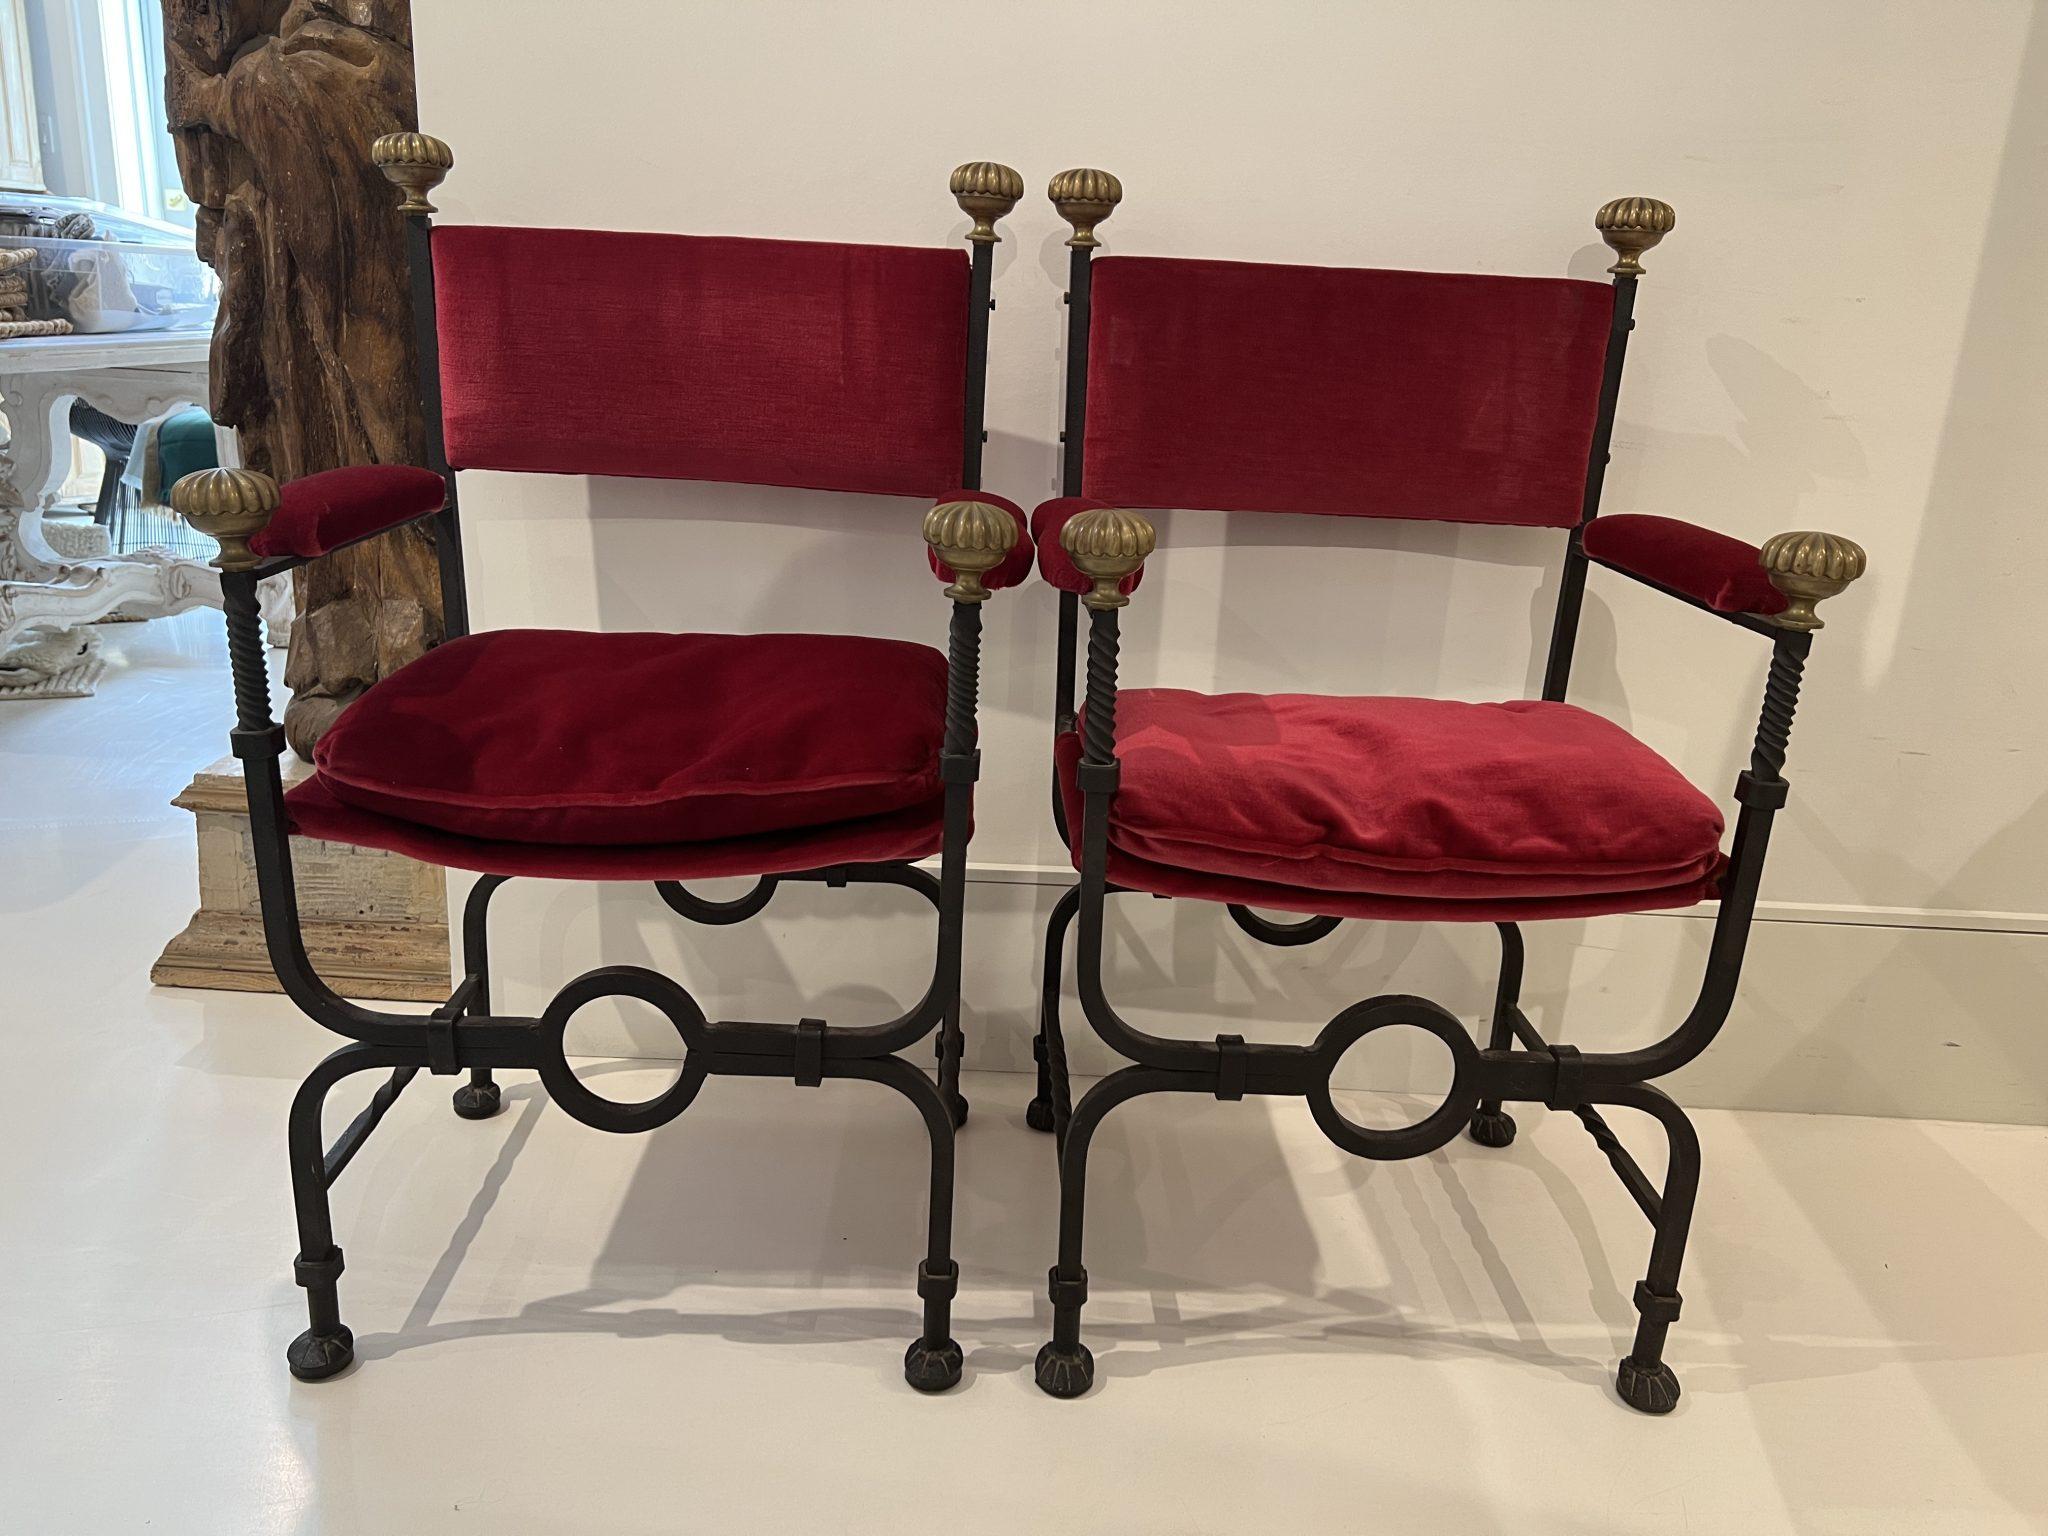 A pair of Savonarola chairs fabricated in heavy iron with brass embellishments. The seats, arms and back are upholstered in lush red velvet.